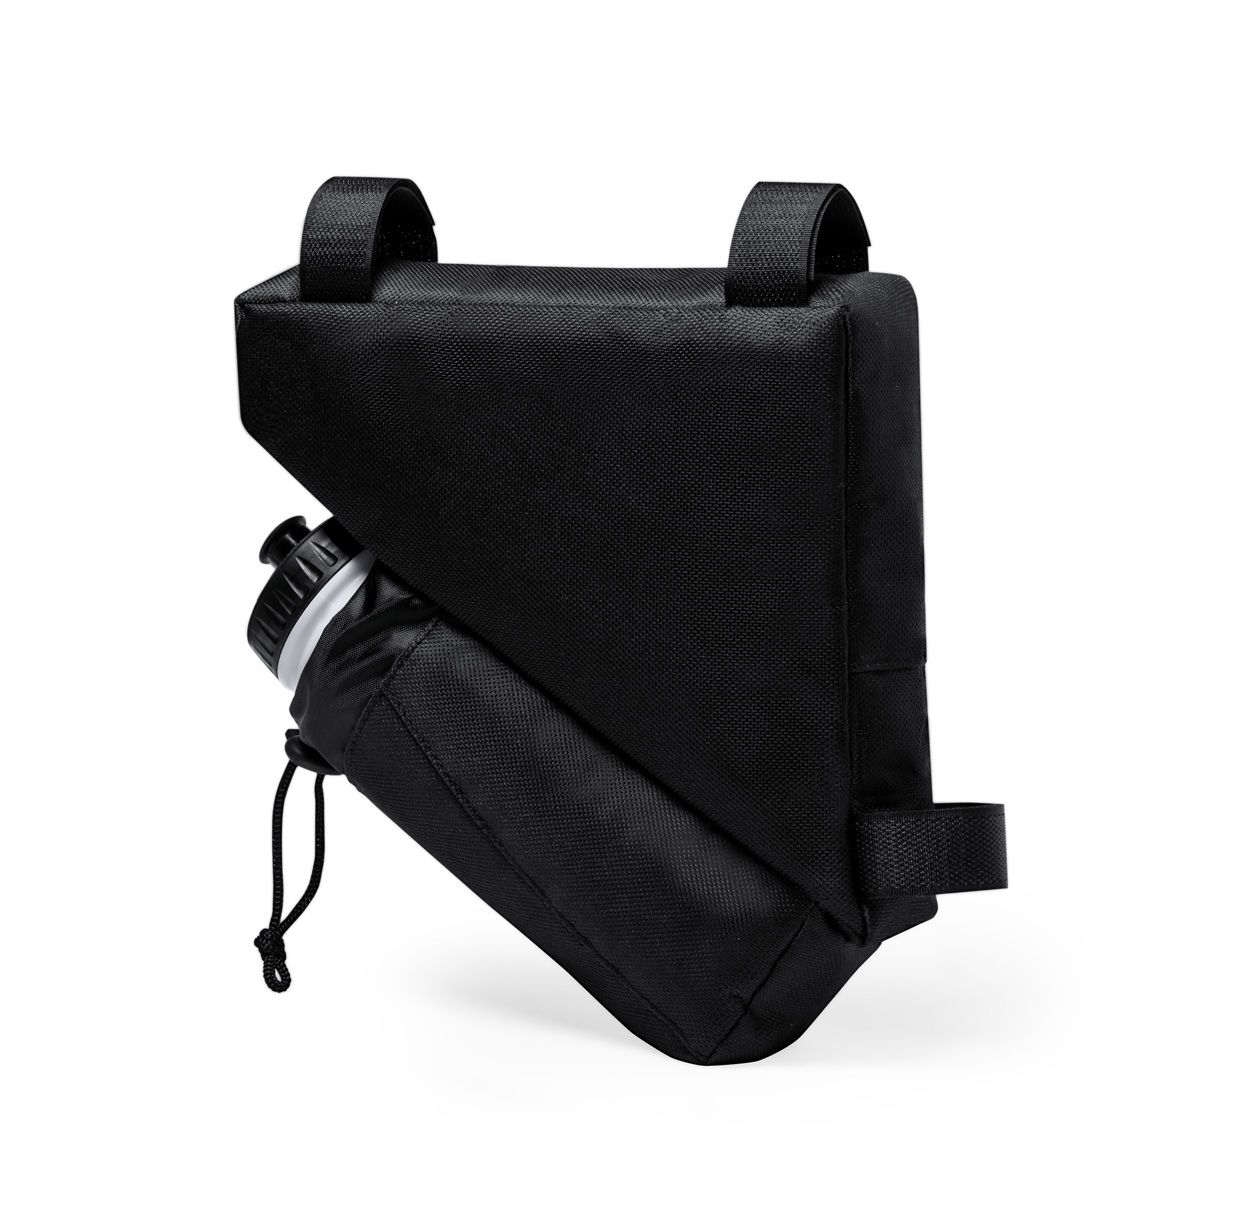 Promo  Leven bicycle frame bag